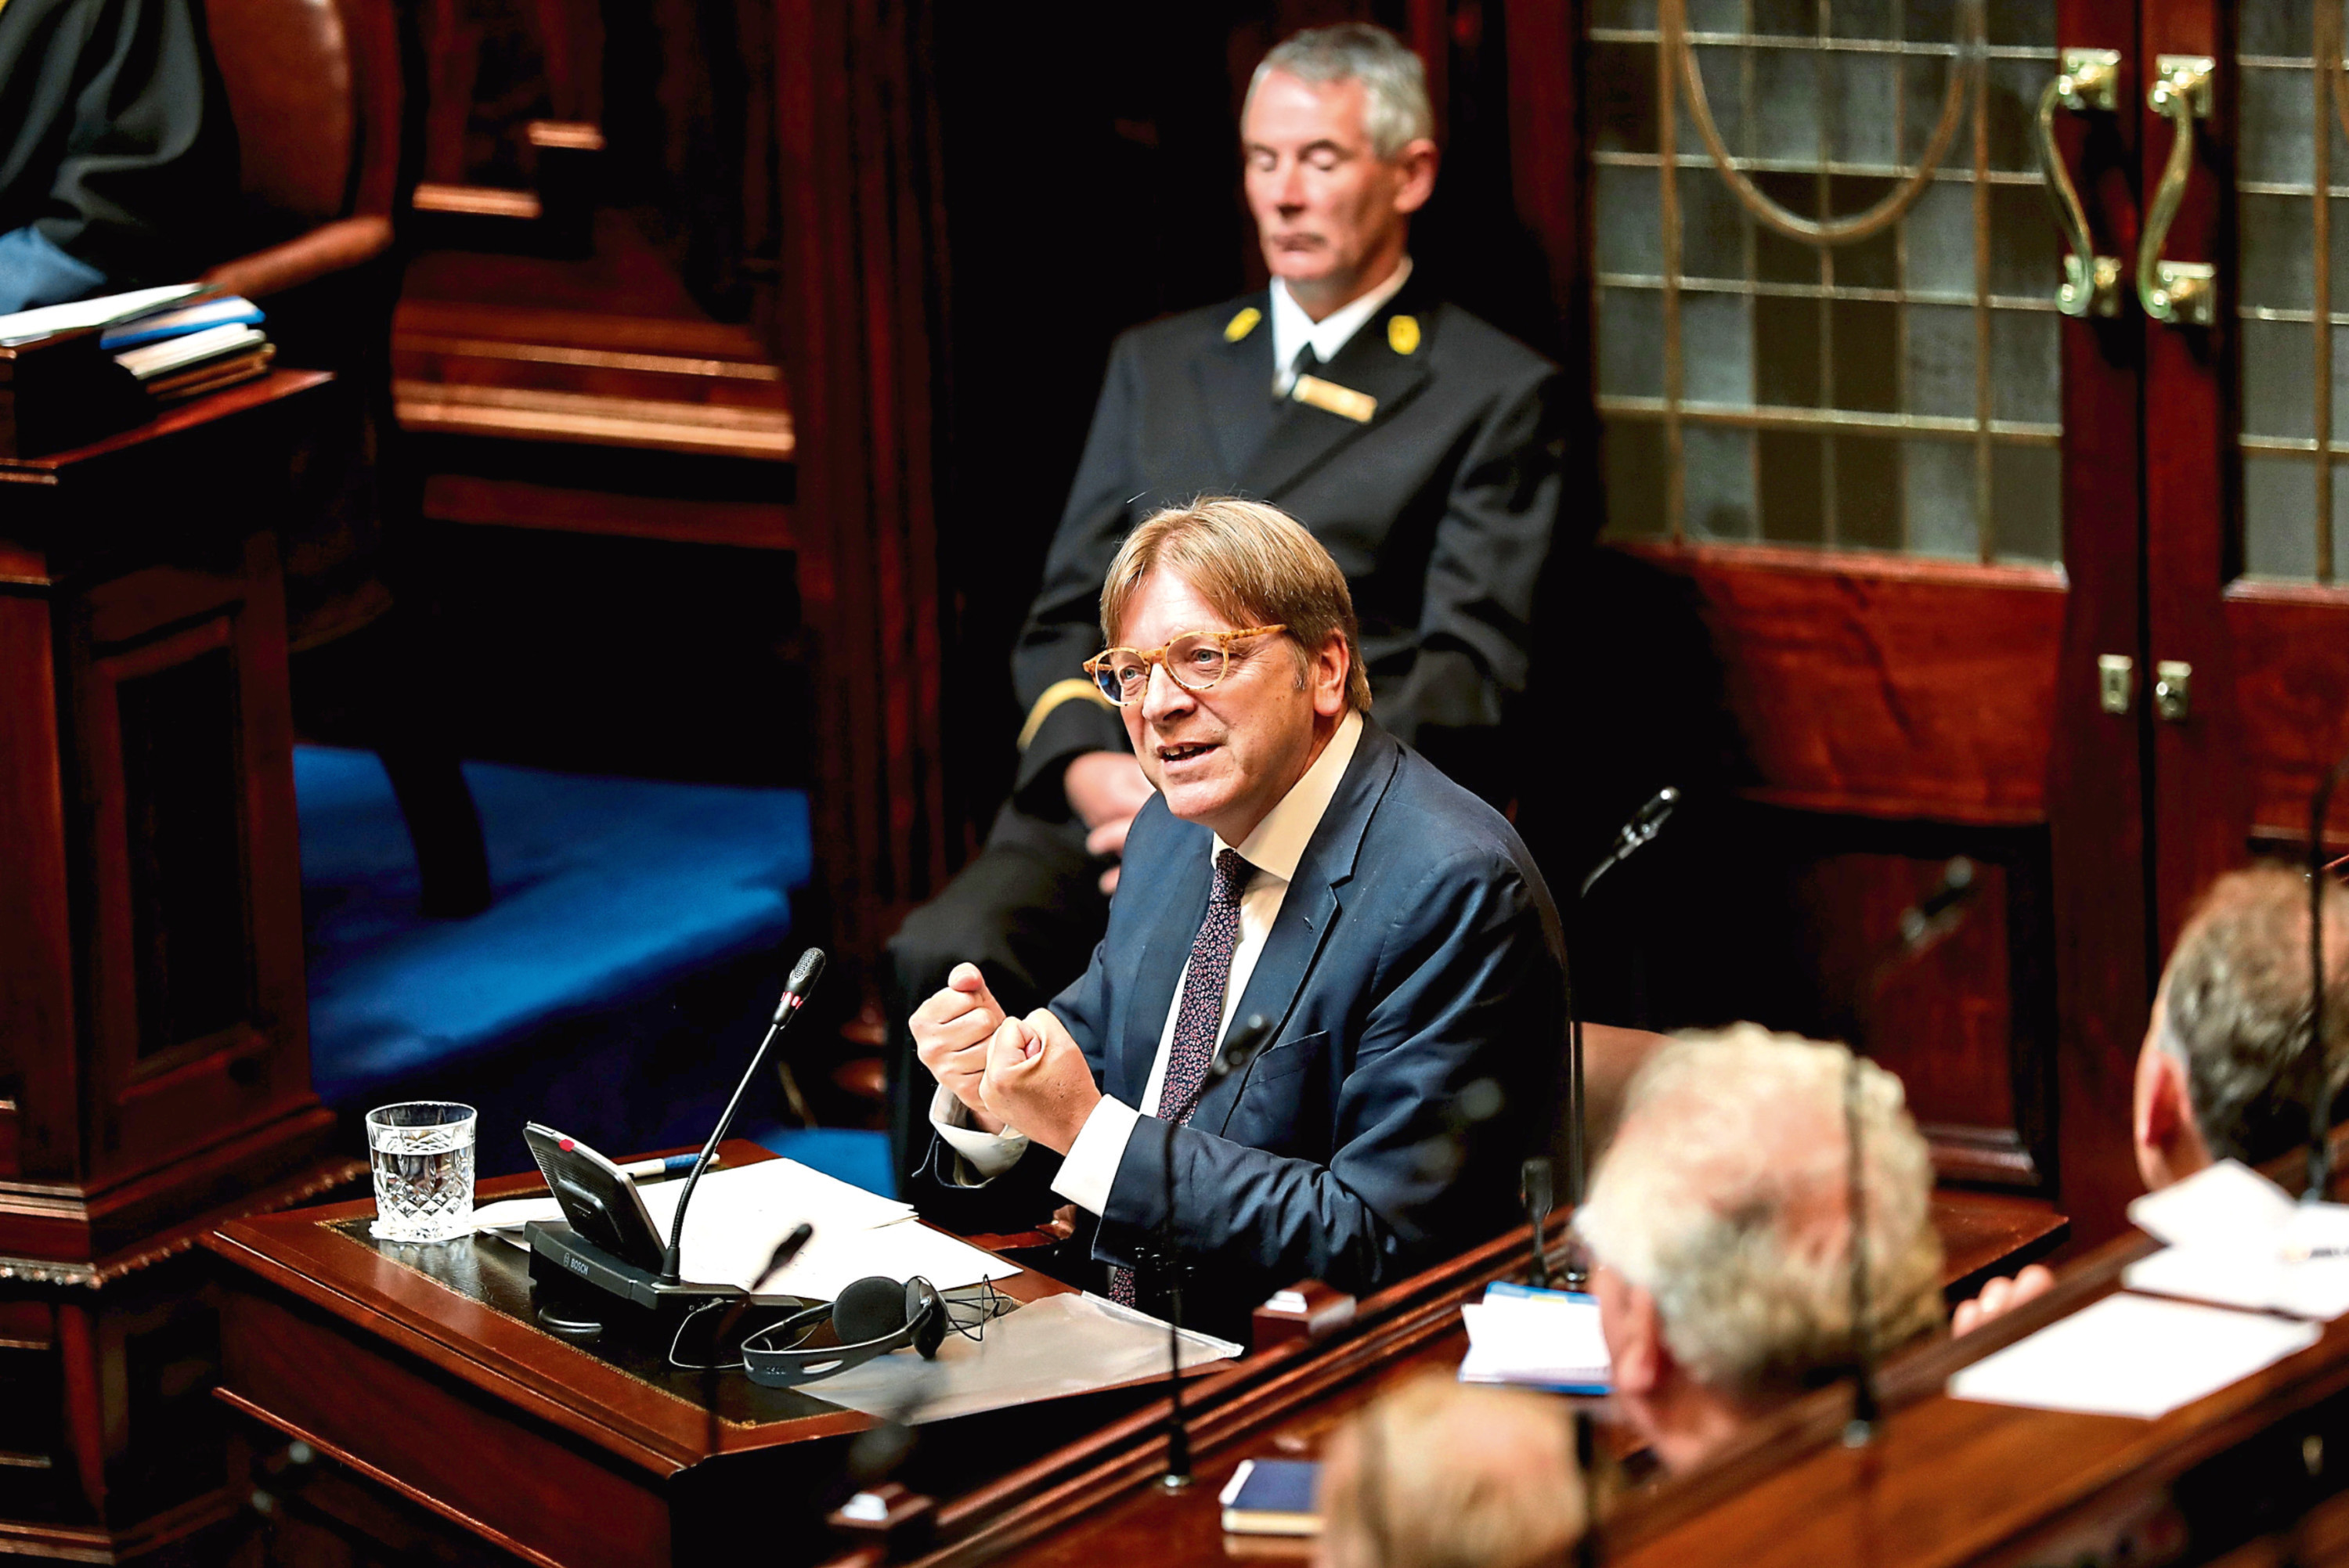 One correspondent argues that renowned “bullies” in the European Parliament, such as Guy Verhofstadt, are taking advantage of the soft approach from Brexit negotiators.